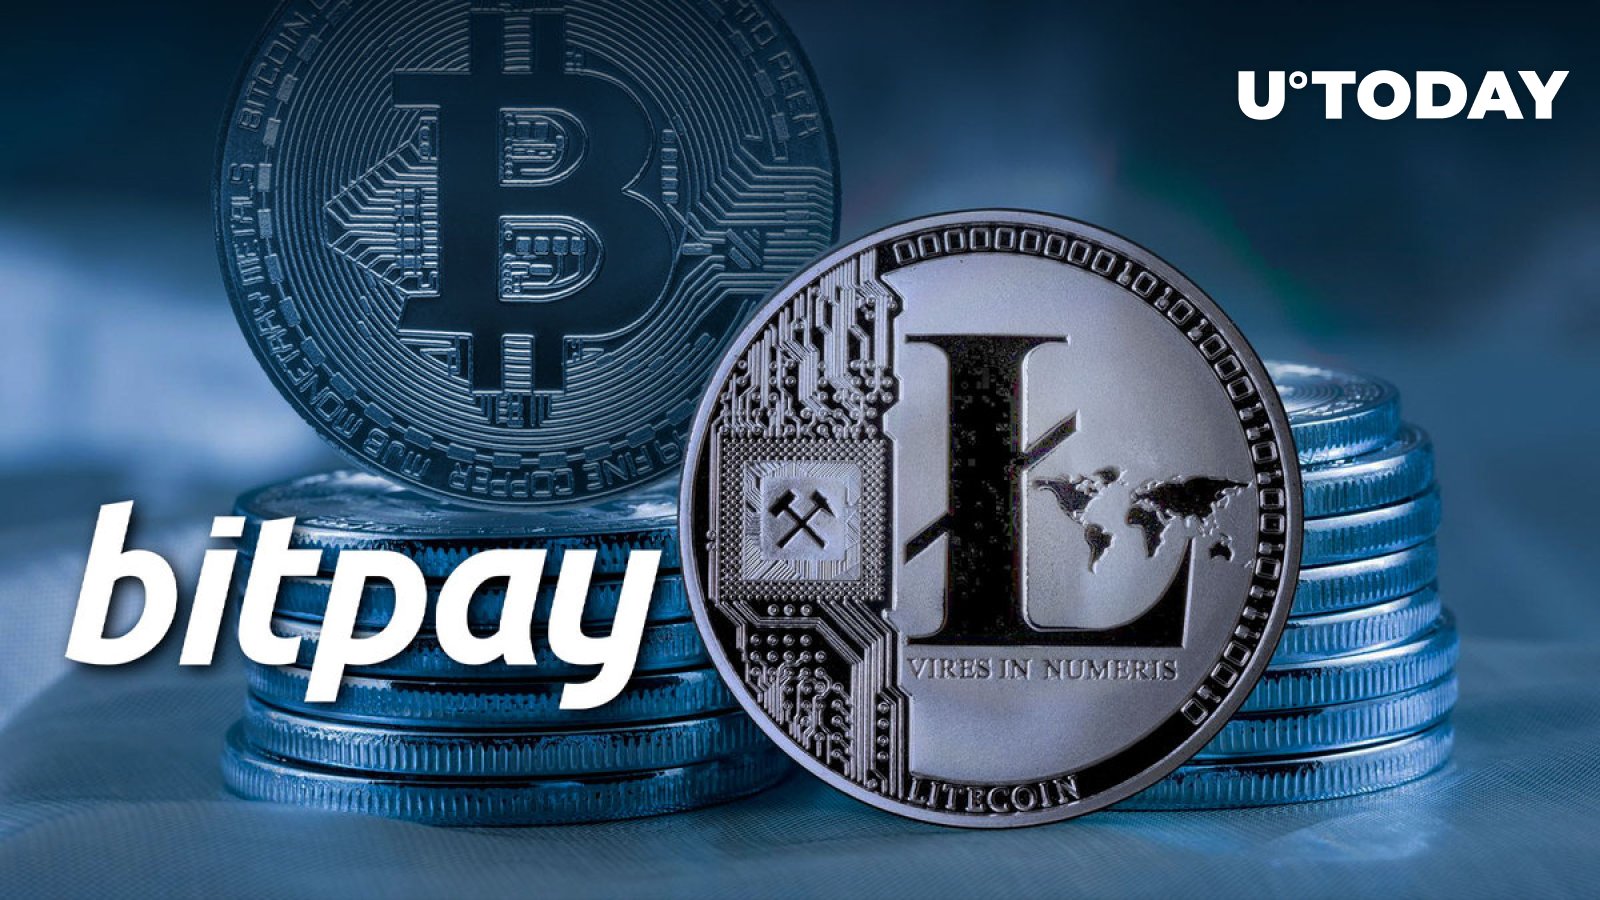 Litecoin (LTC) and Dogecoin (DOGE) Top BitPay Rankings